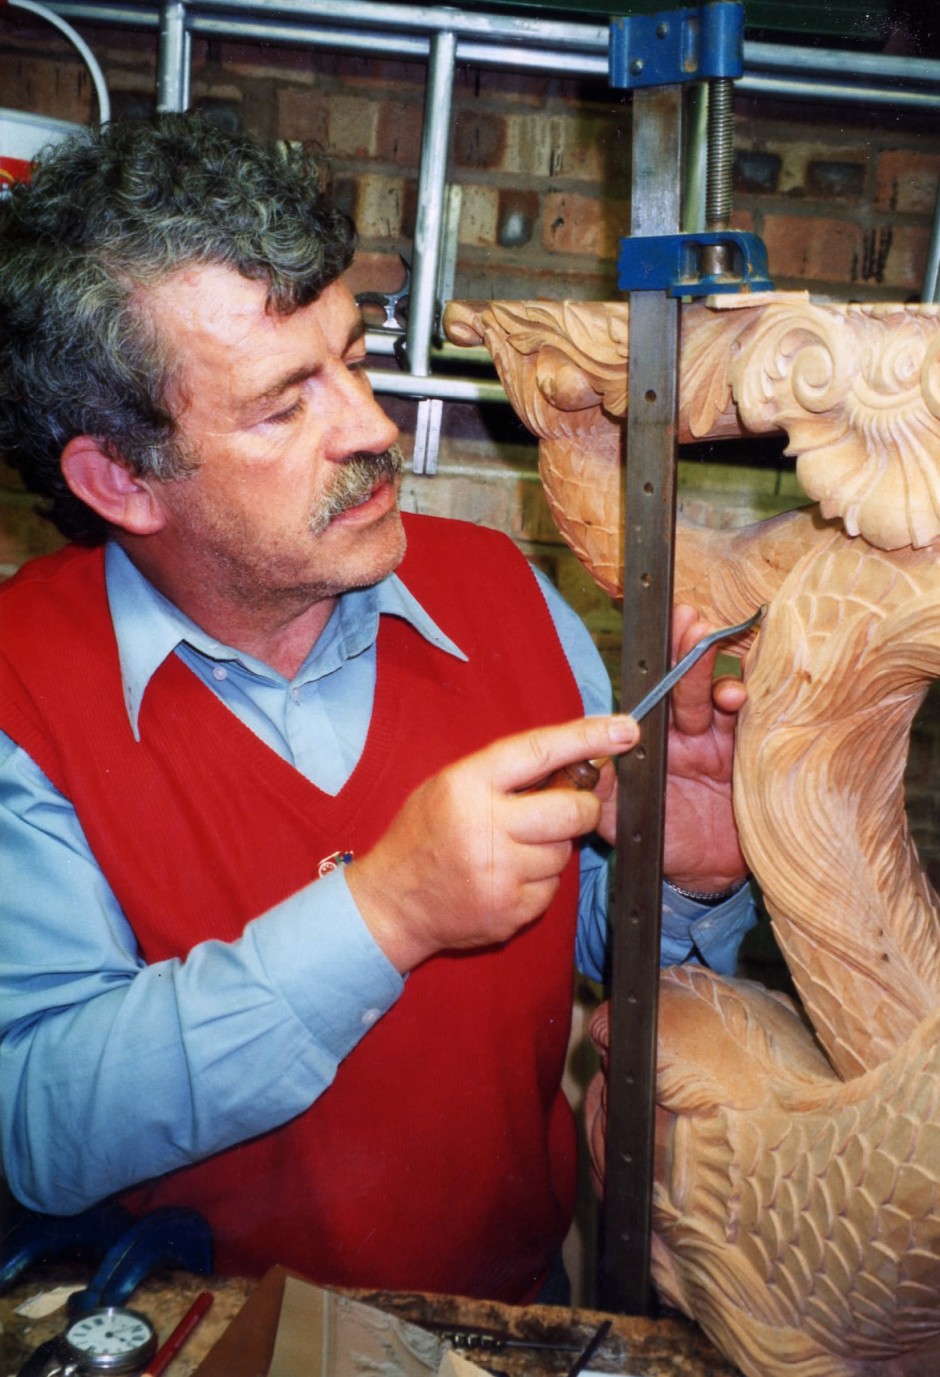 Jose adds final details to the carvings - final carving, light touches